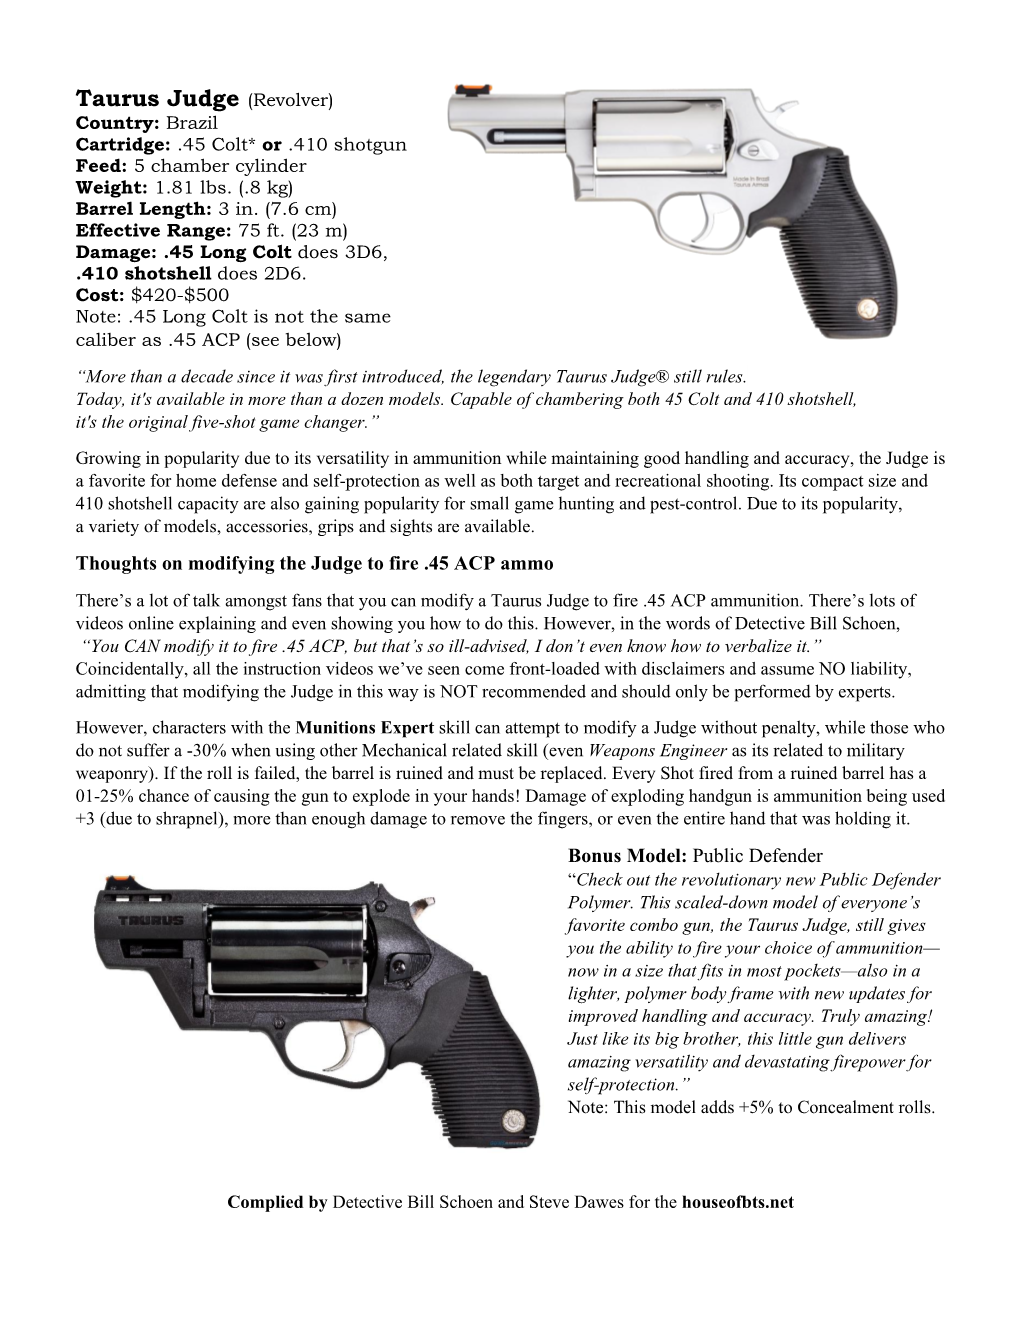 Taurus Judge (Revolver) Country: Brazil Cartridge: .45 Colt* Or .410 Shotgun Feed: 5 Chamber Cylinder Weight: 1.81 Lbs